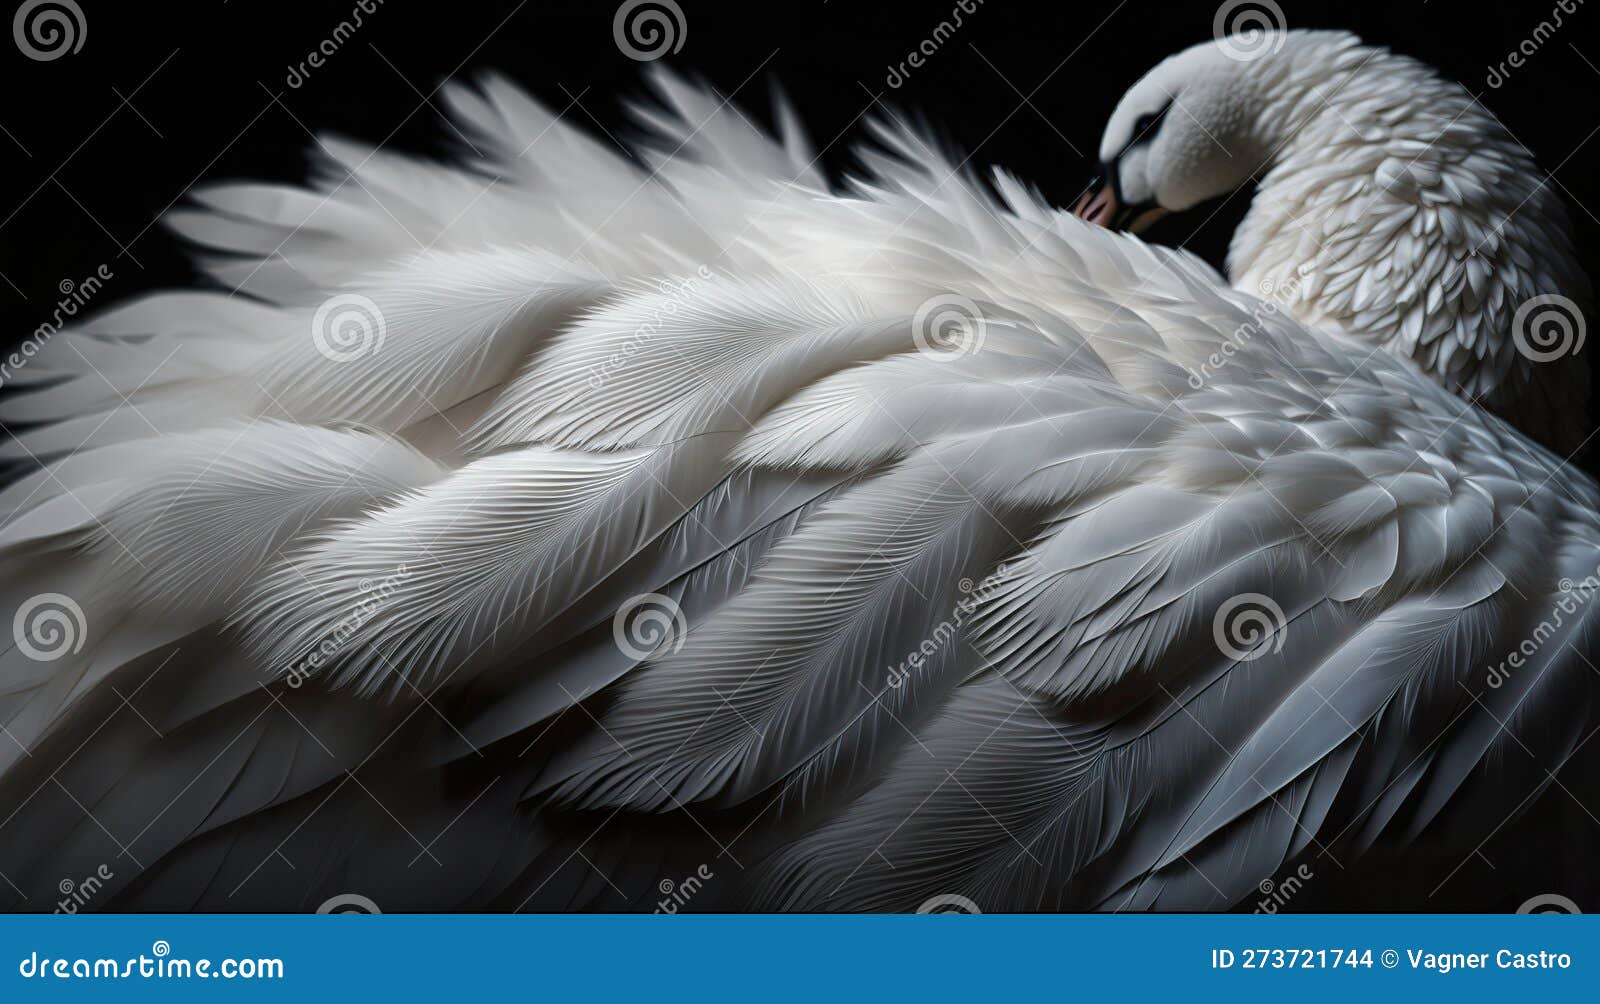 https://thumbs.dreamstime.com/z/white-swan-color-feathers-bird-background-colored-plumage-close-up-photo-shimmered-feathers-paradise-bird-d-realistic-273721744.jpg